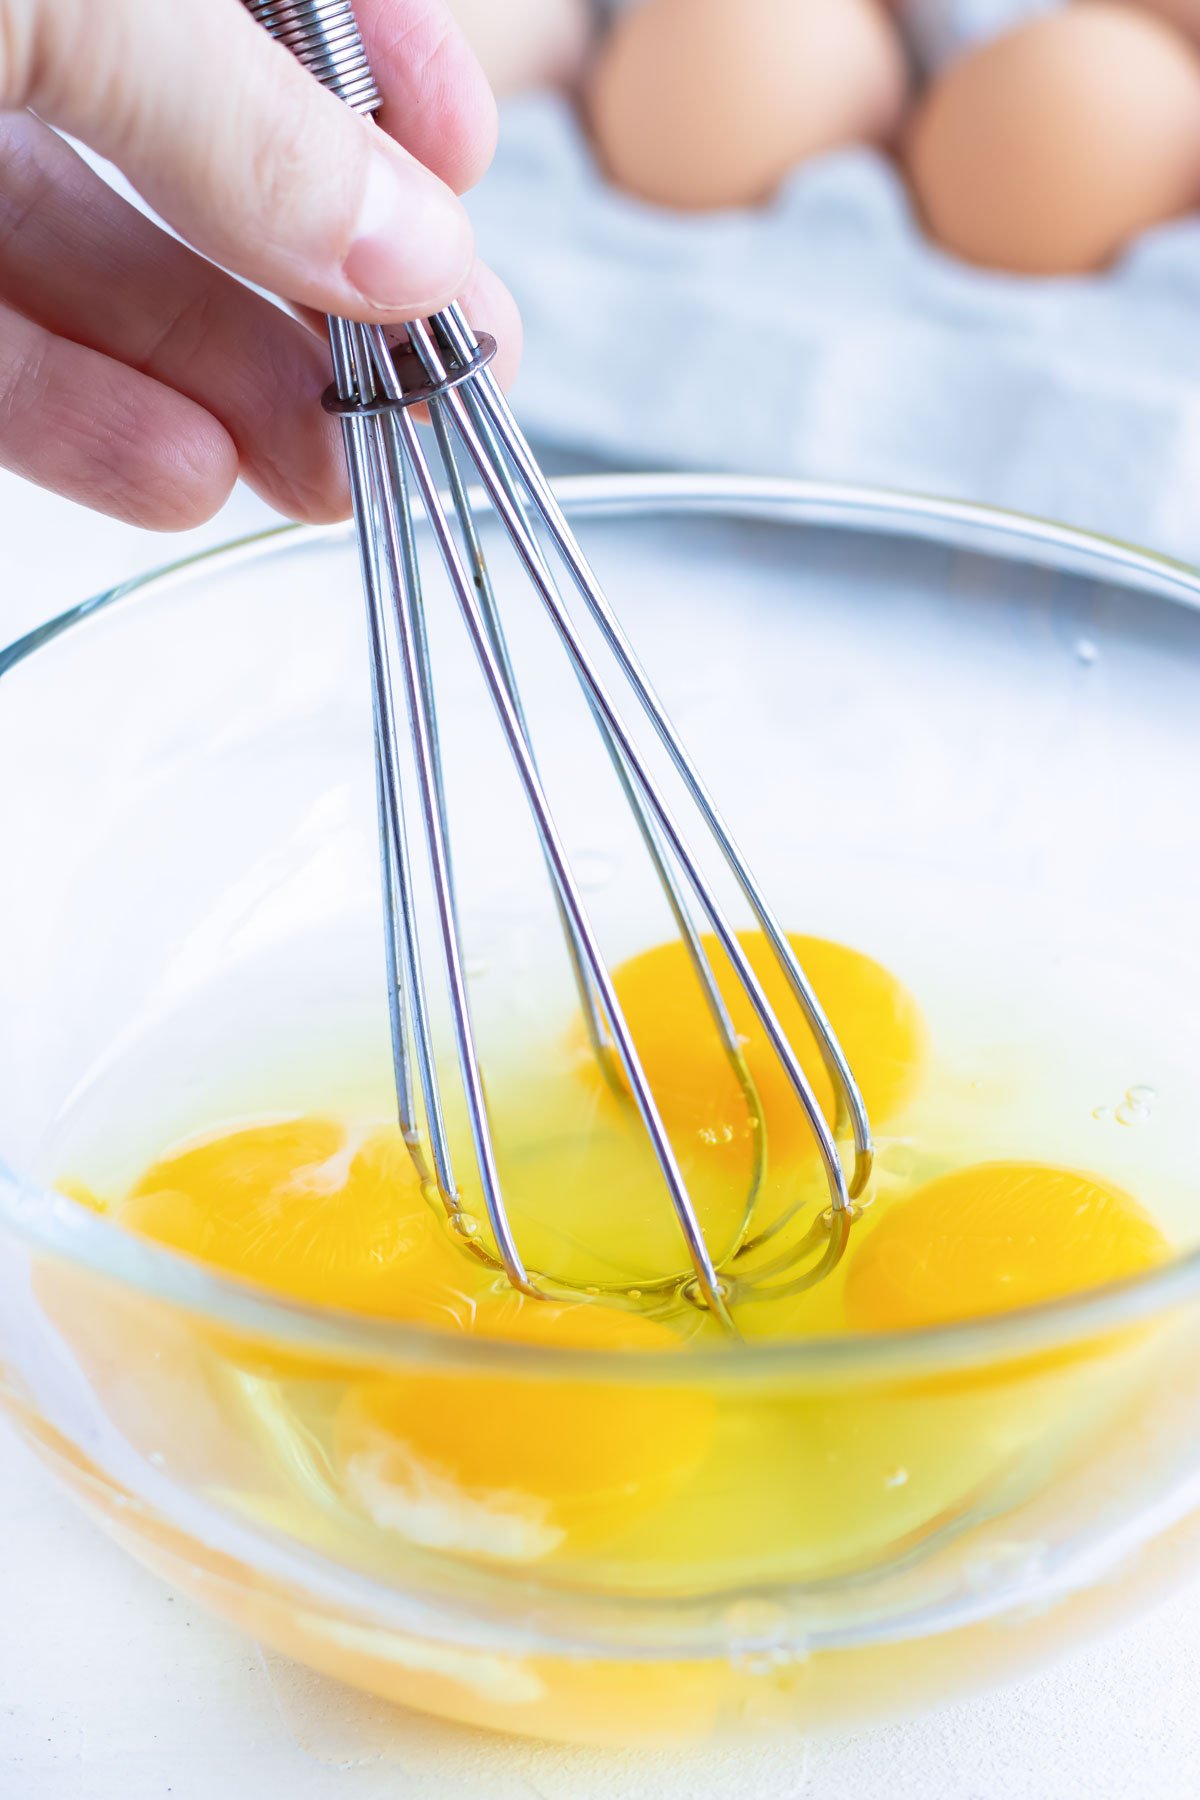 Eggs being whisked together to add to a chicken stir-fry with rice.